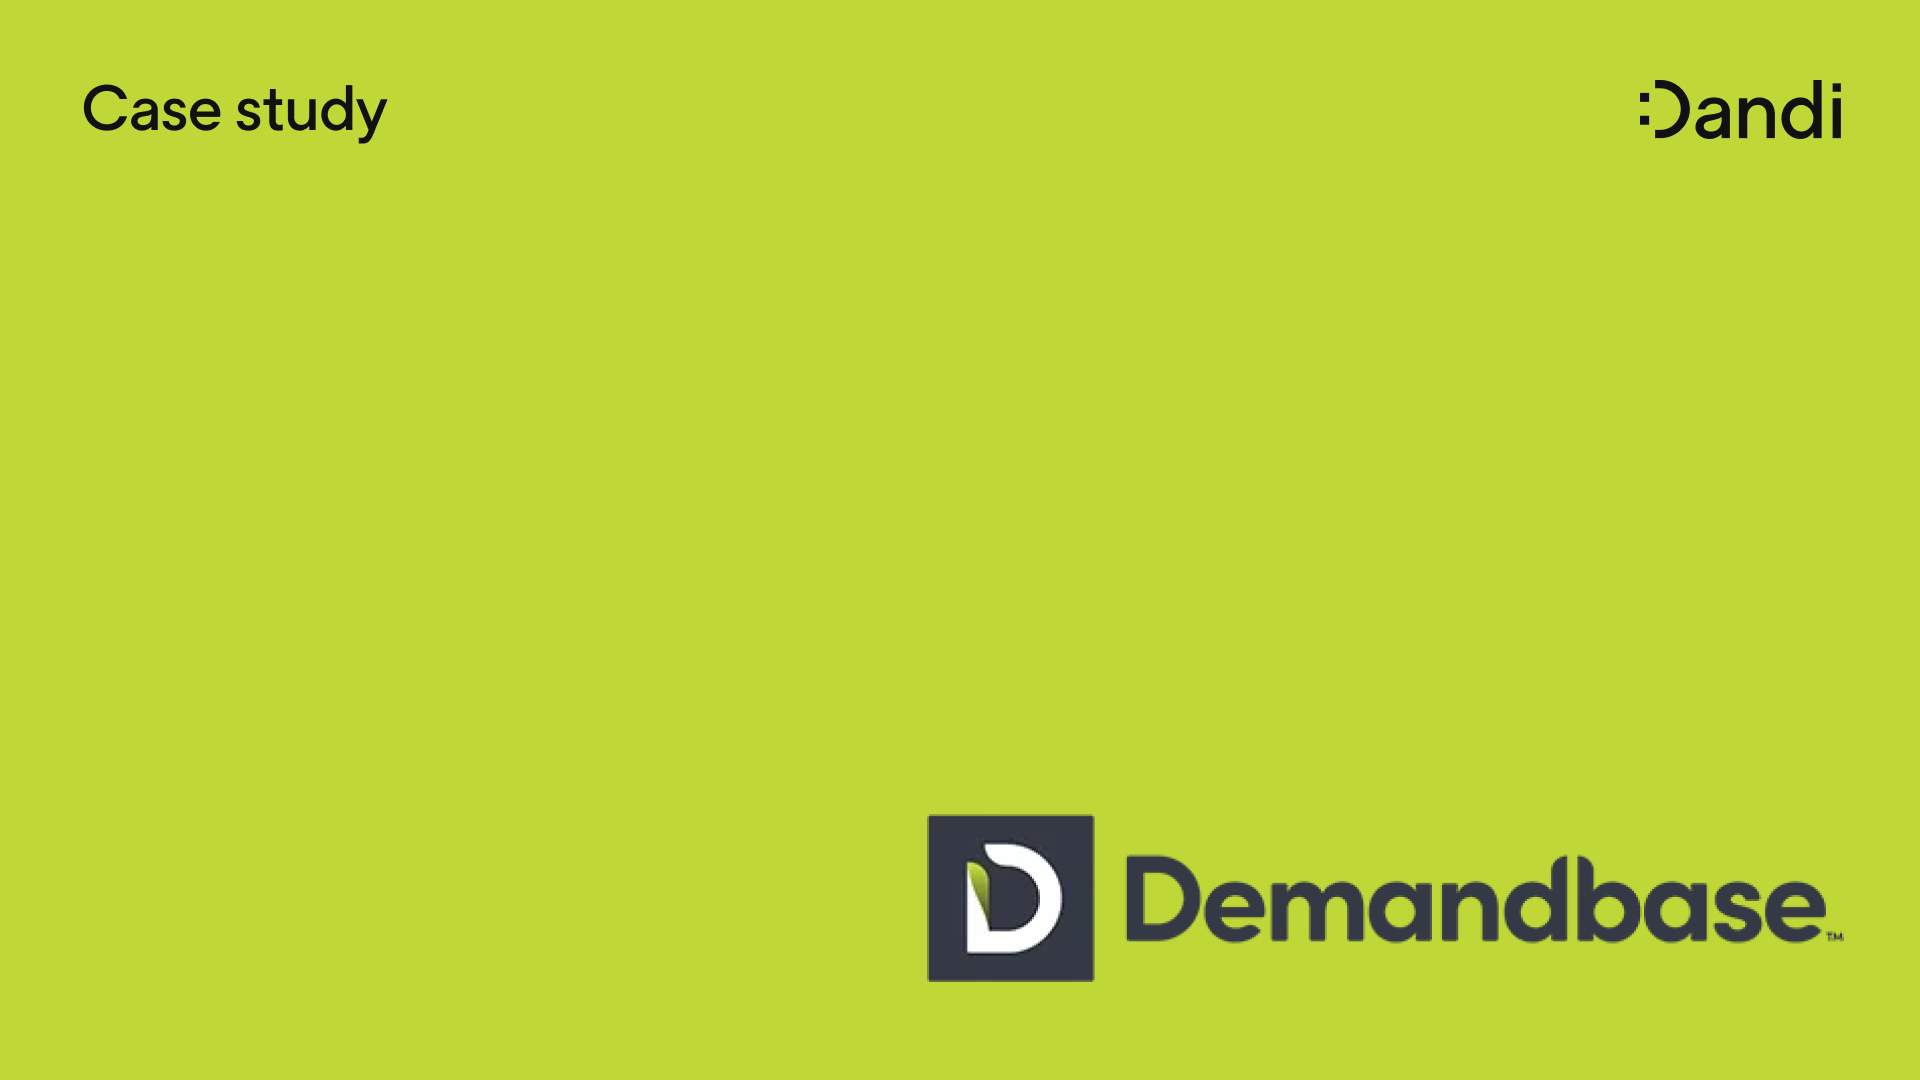 The Demandbase logo against a lime green background.